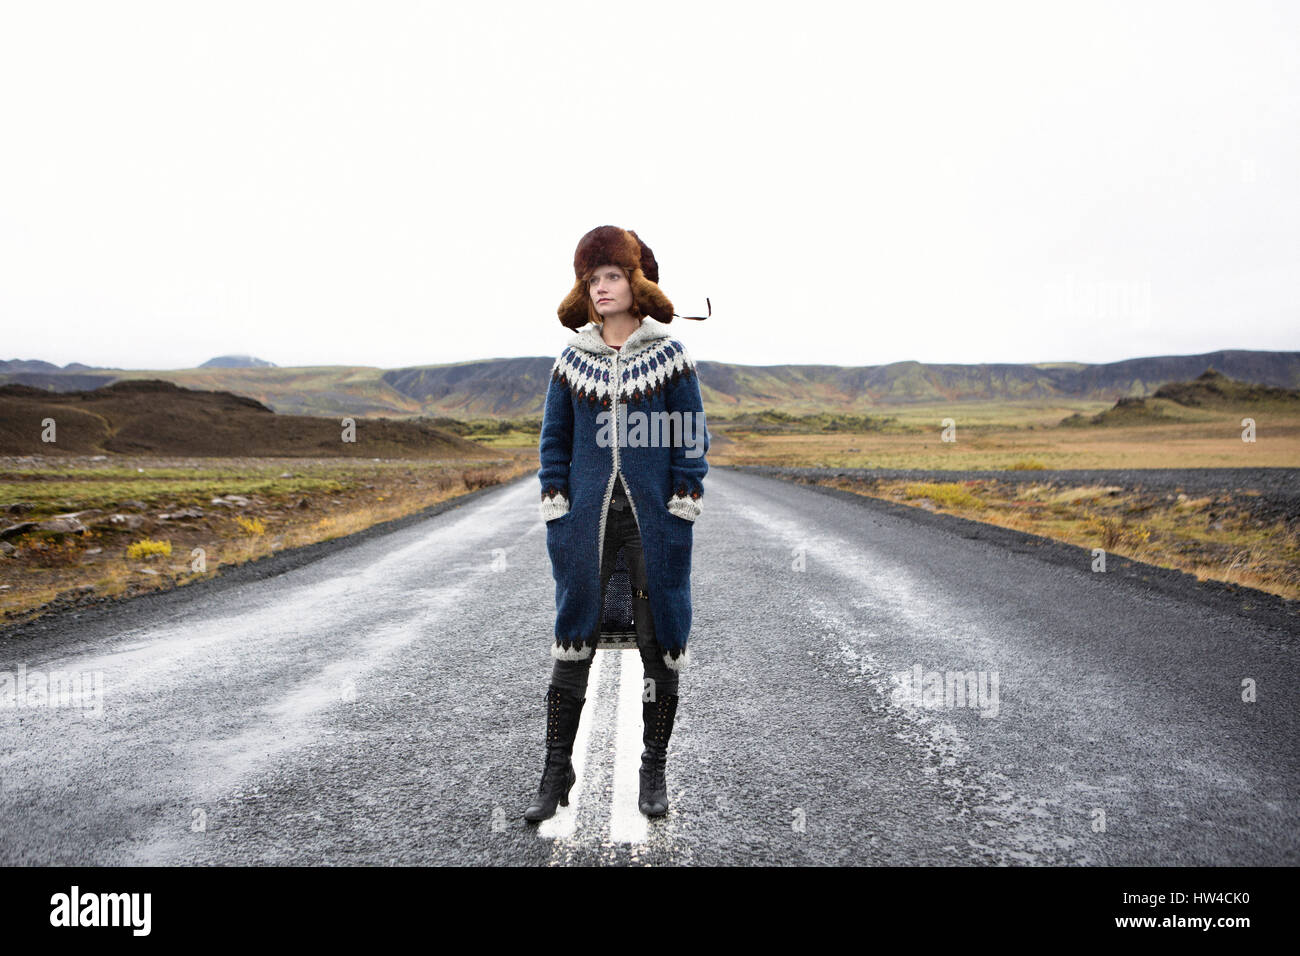 Caucasian woman standing in middle of road Stock Photo